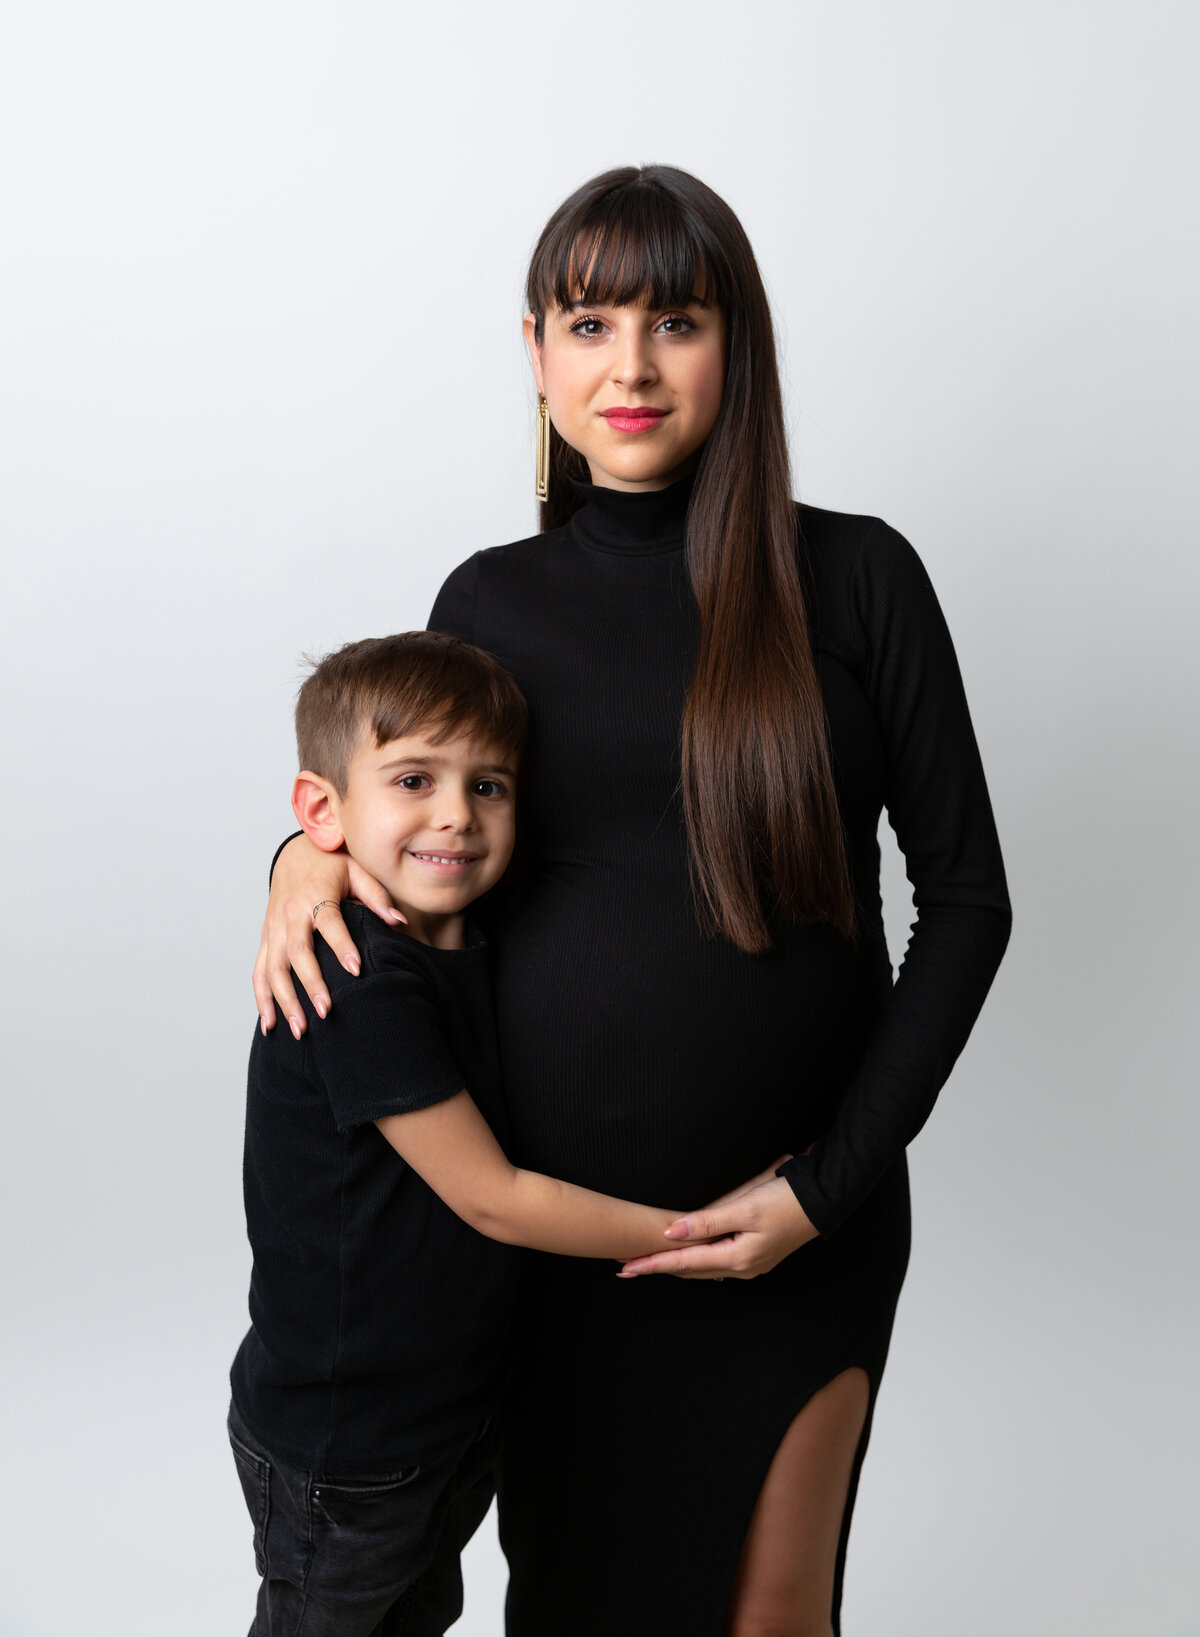 Expectant mom and older son pose for maternity photos in Brooklyn, NY photo studio. Big brother is cuddling mom and holding her bump. Mom has arms wrapped around her older son. Both are smiling at the camera.